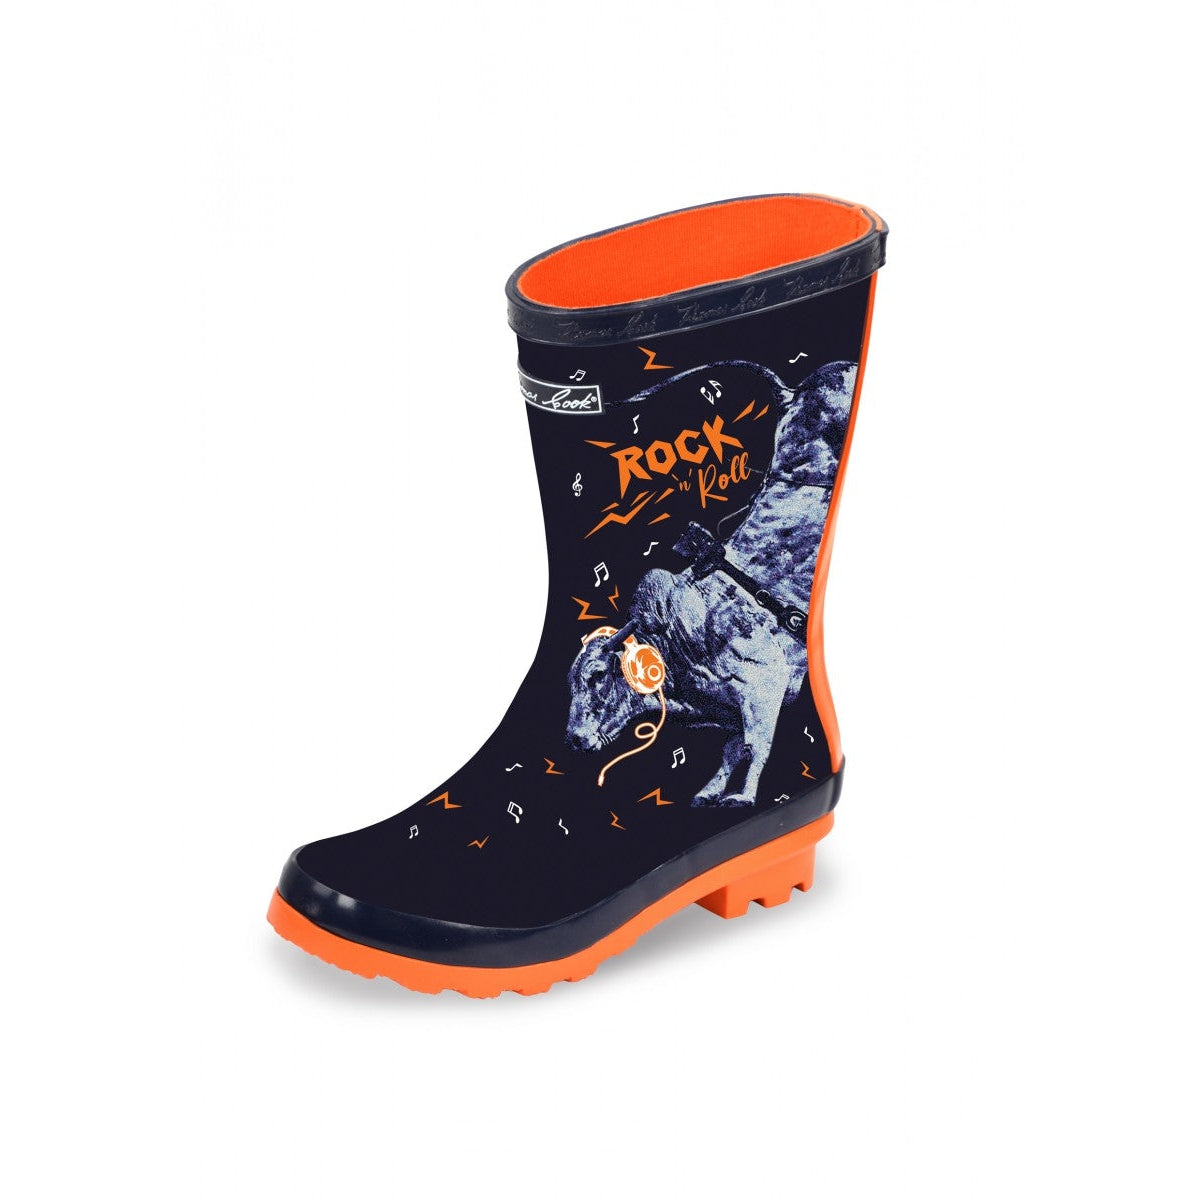 Thomas Cook Kids Rock n Roll Rubber Boots